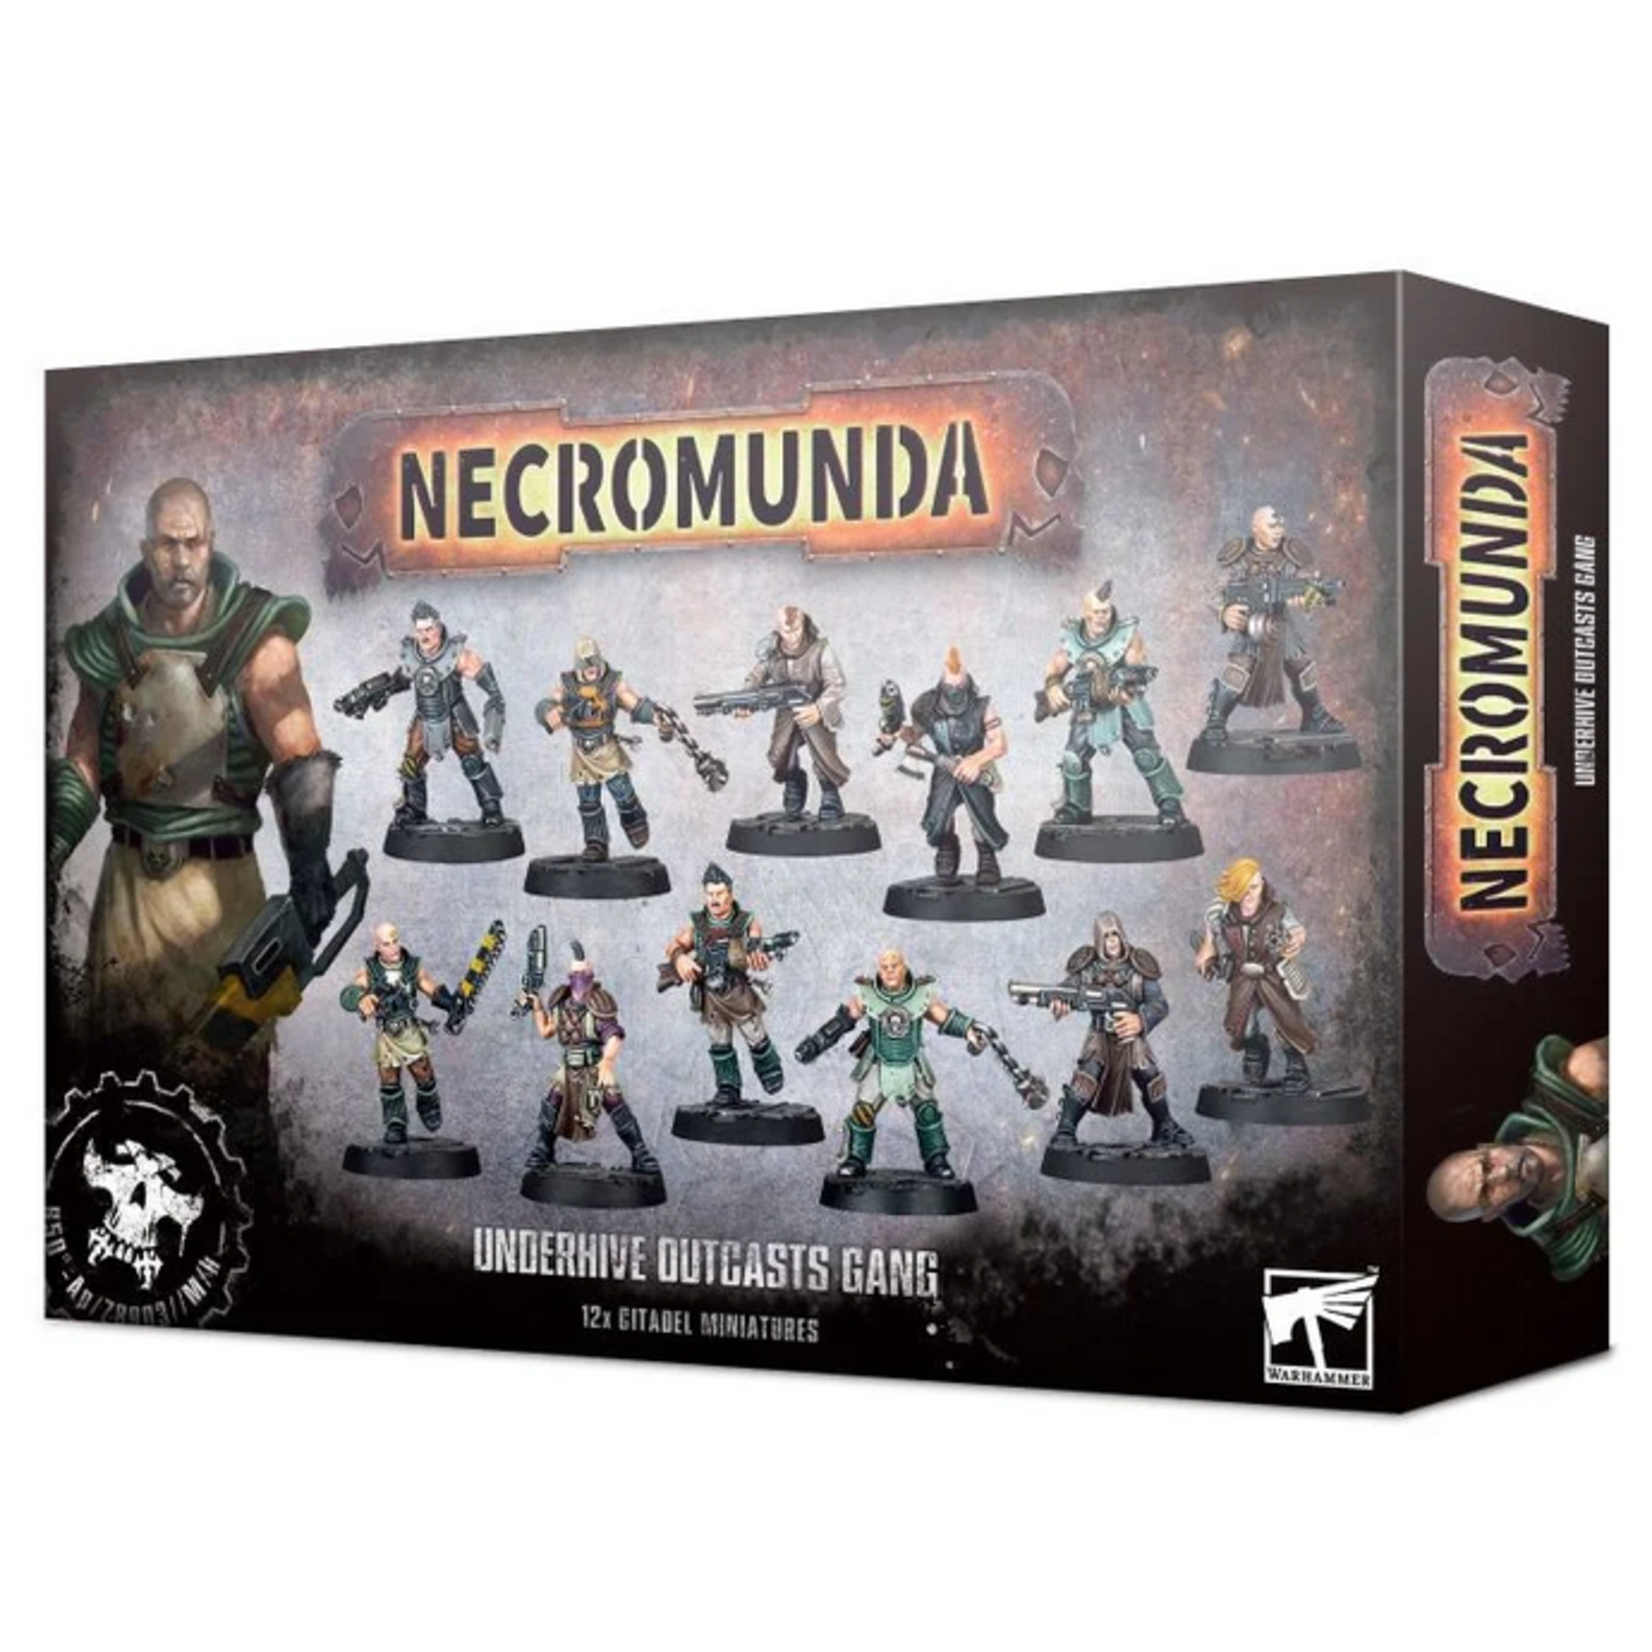 Necromundia: Underhive Outcasts Gang